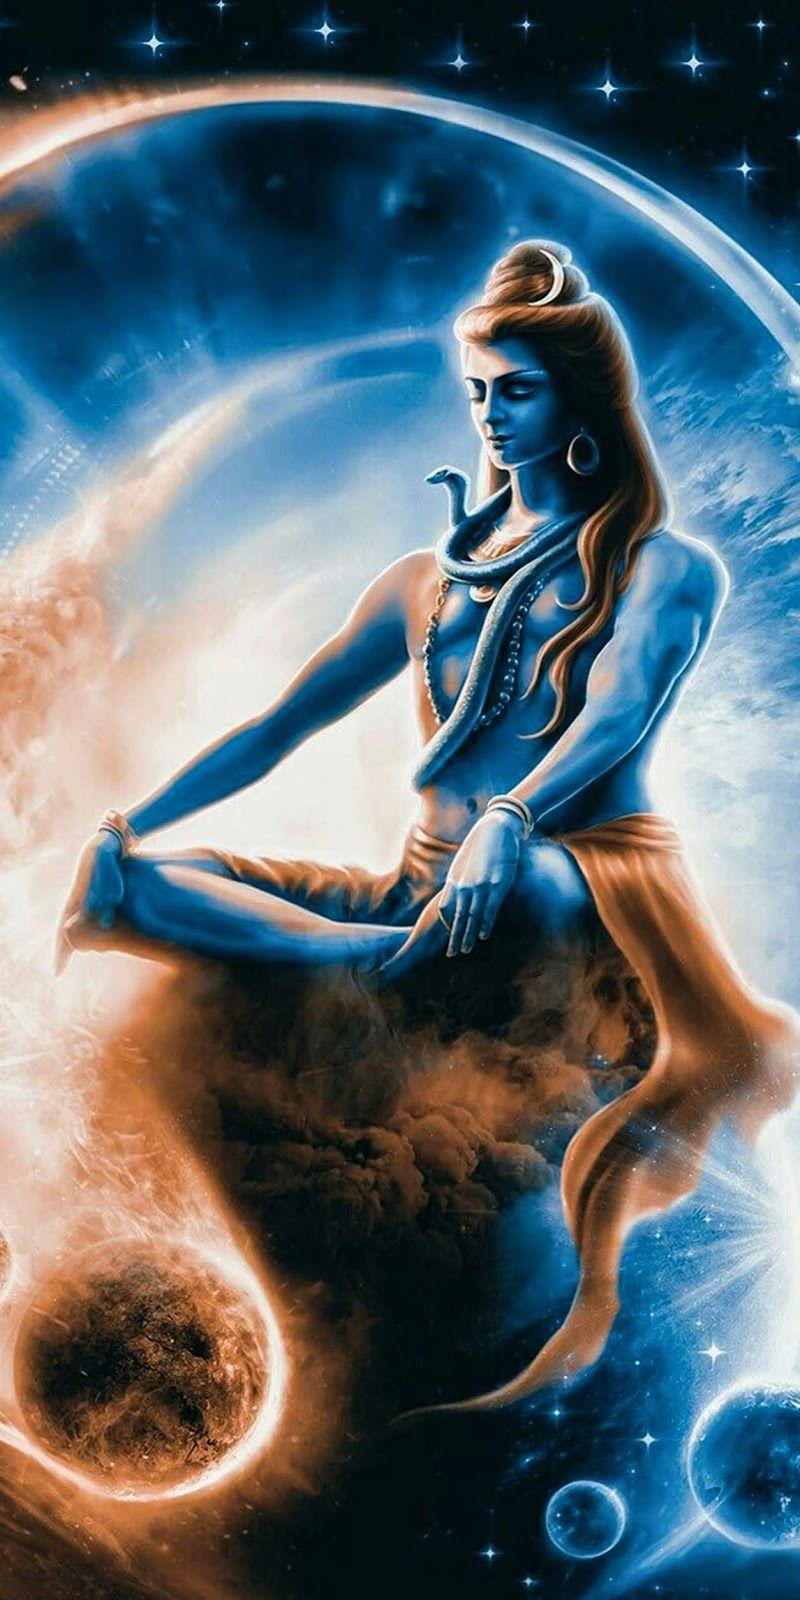 Download Lord Shiva in Tapas Wallpaper for your Android, iPhone